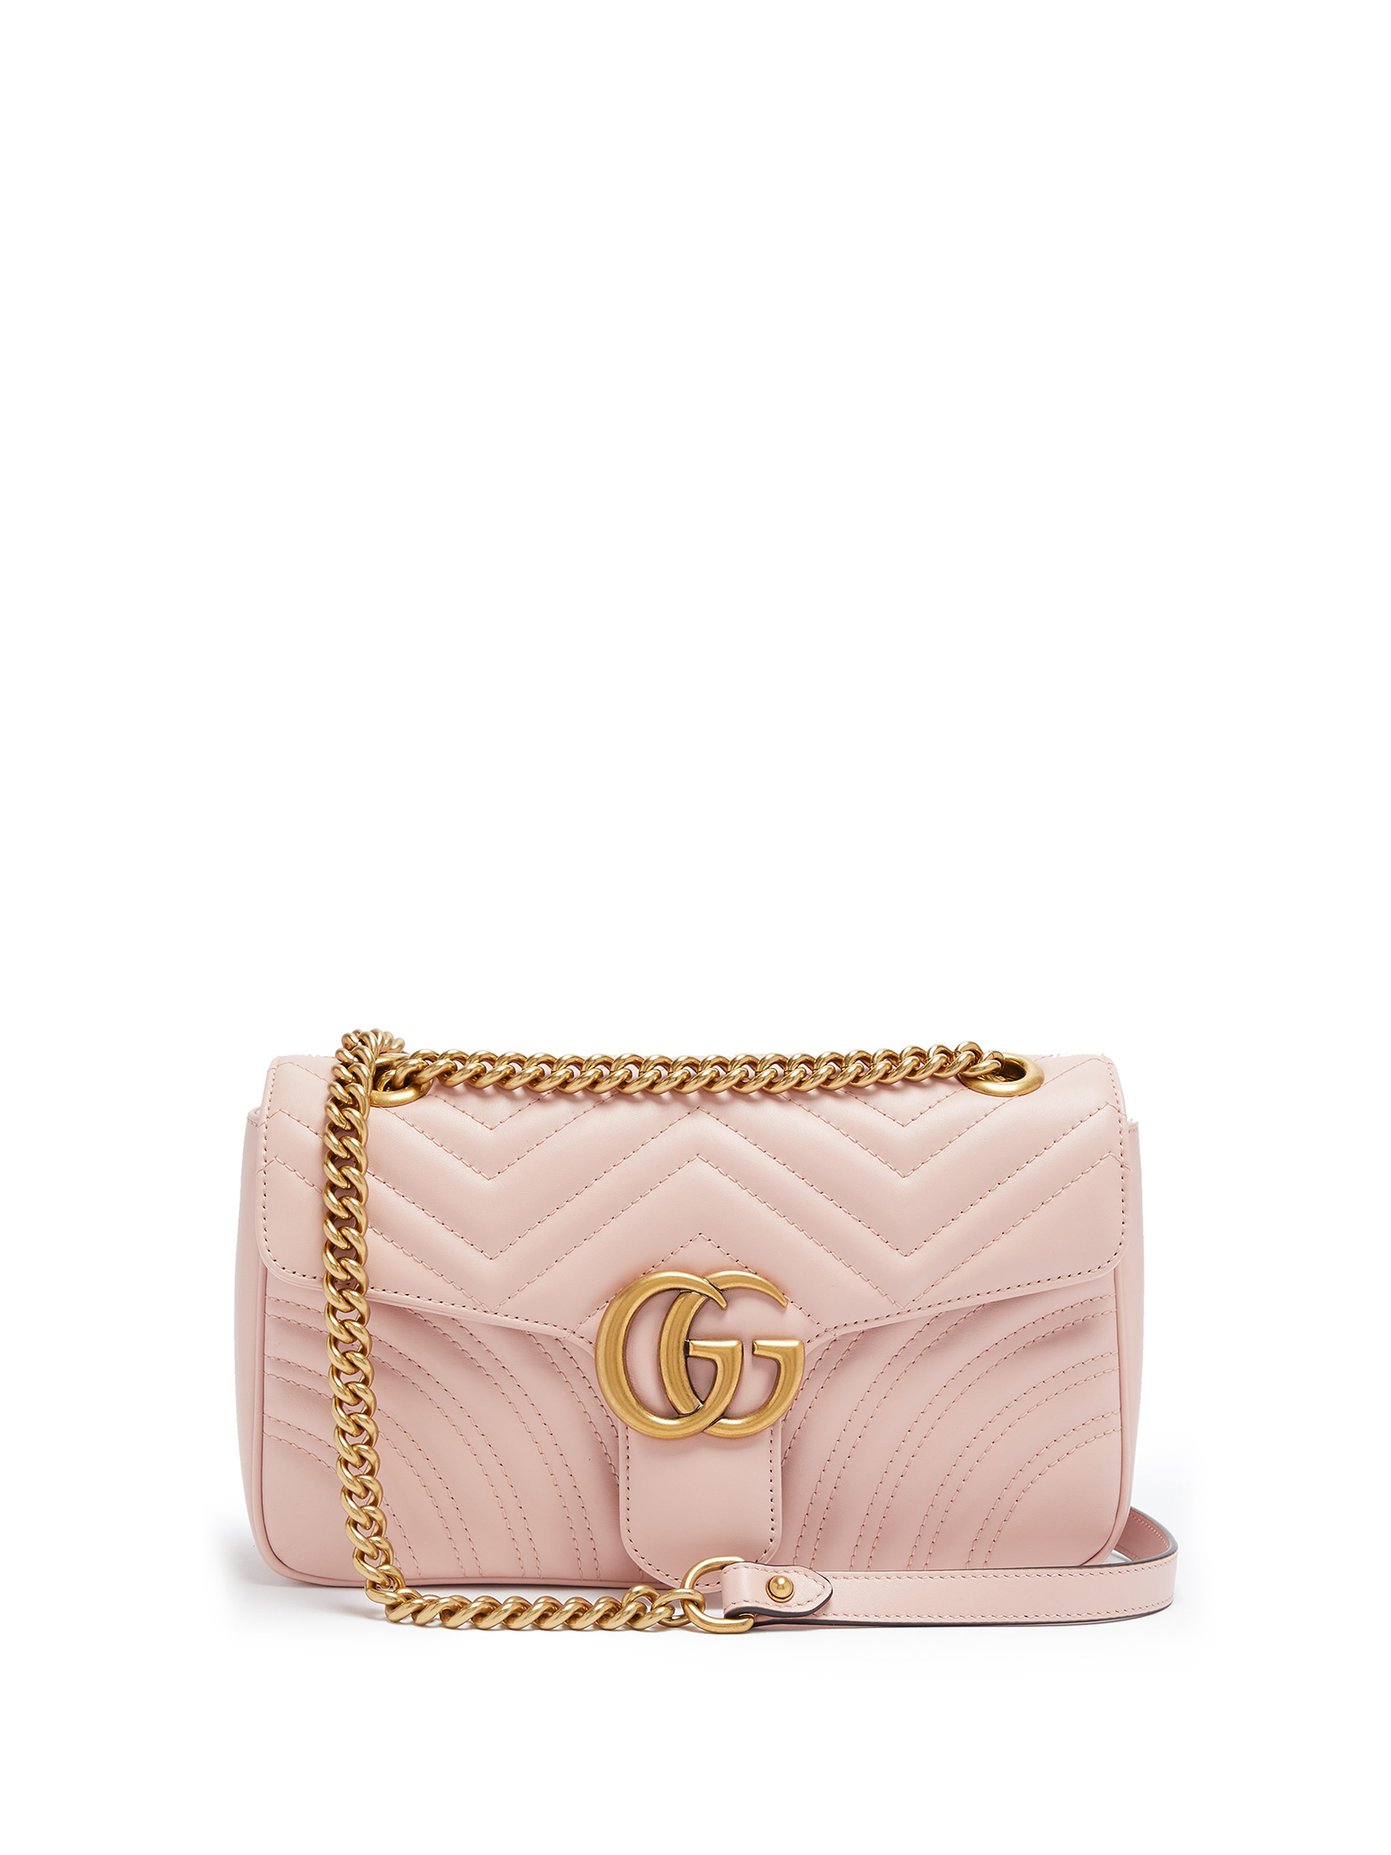 gg marmont small quilted leather shoulder bag